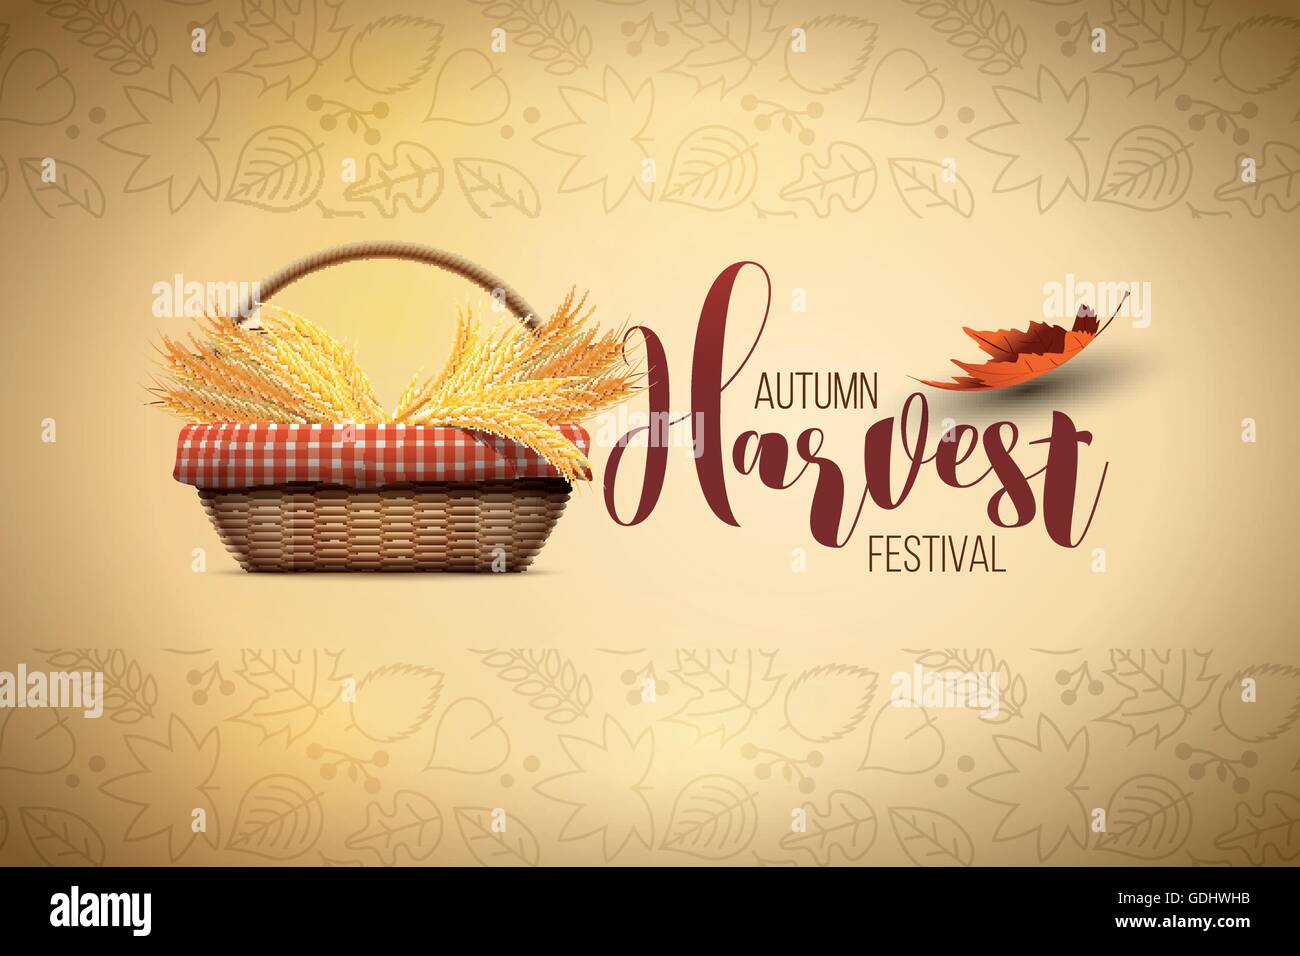 Vector autumn harvest festival poster design template. Elements are layered separately in vector file. Stock Vector